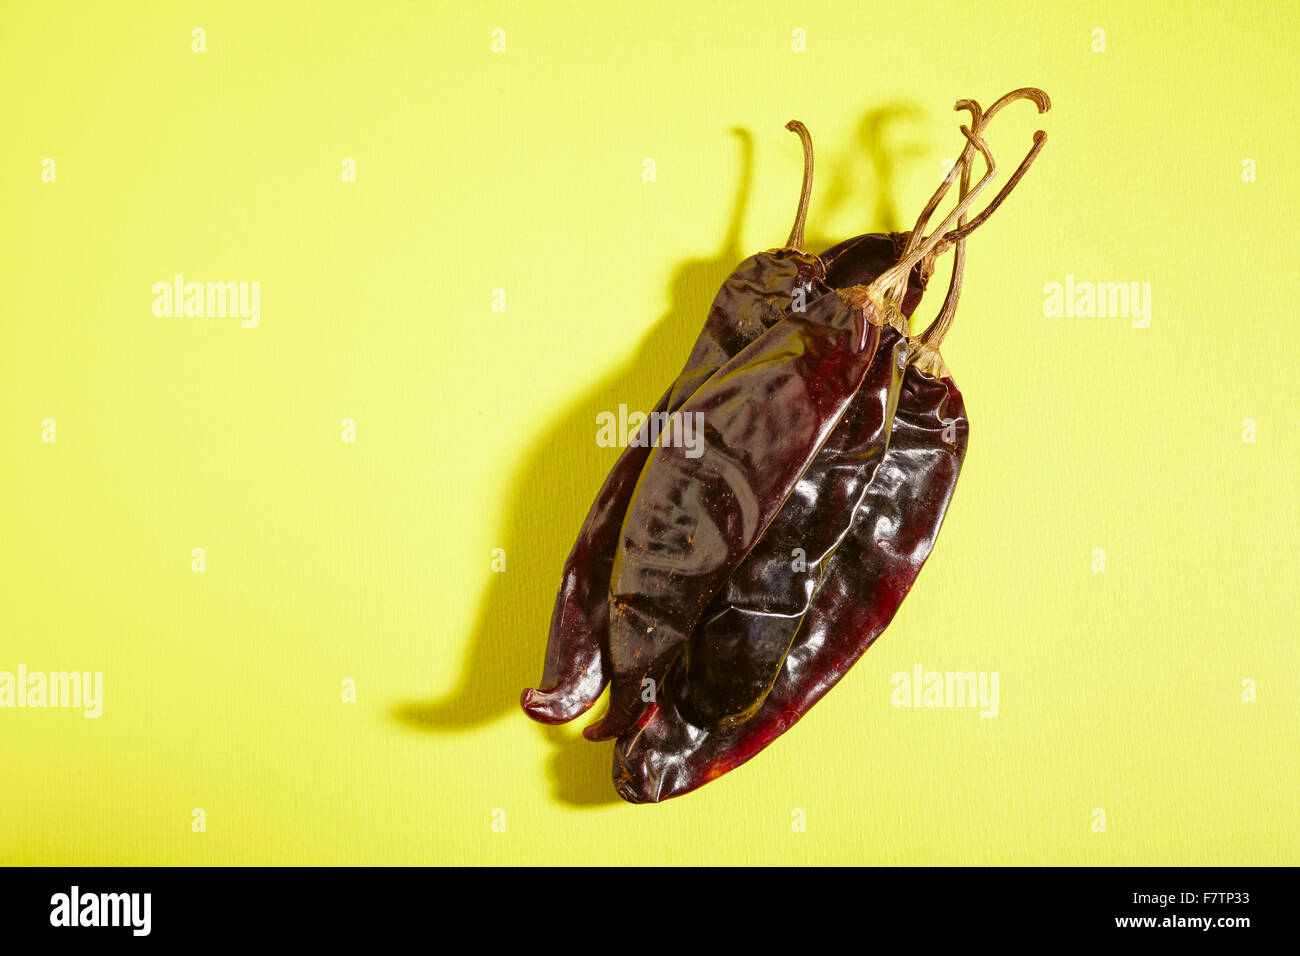 Whole, dried guajillo peppers from Mexico Stock Photo